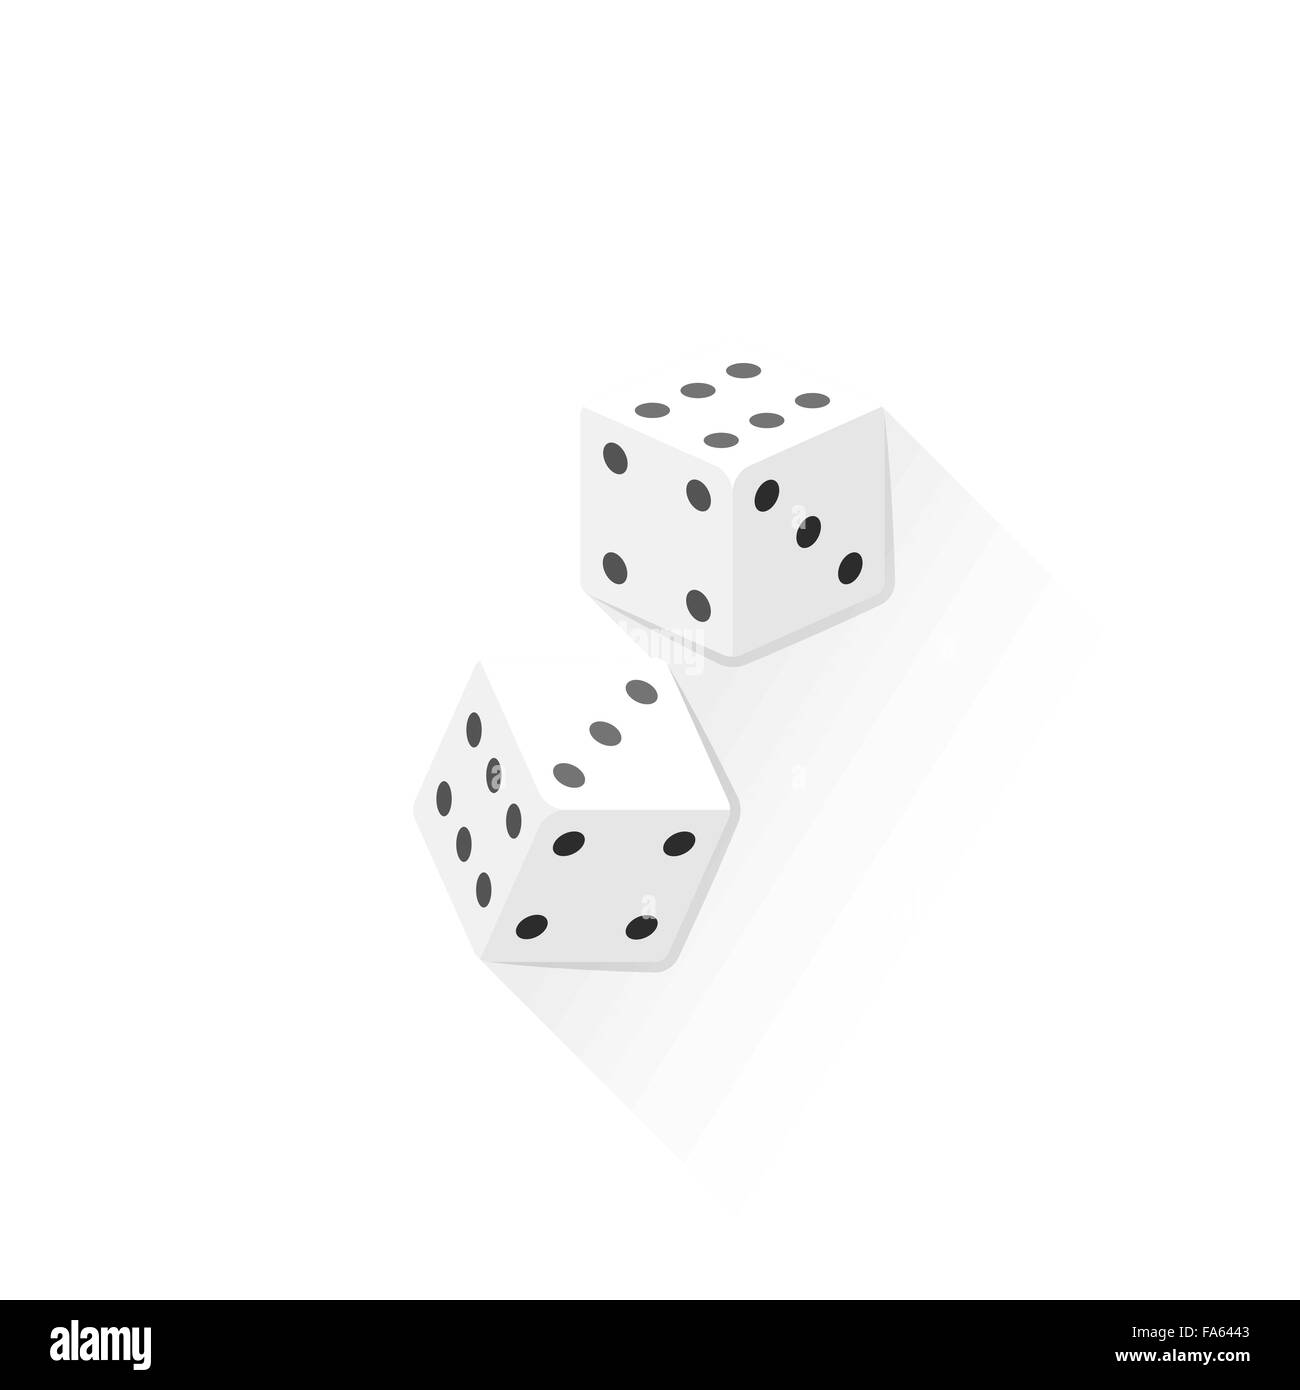 vector gambling pair of white color dice isolated flat design illustration on white background with shadow Stock Vector